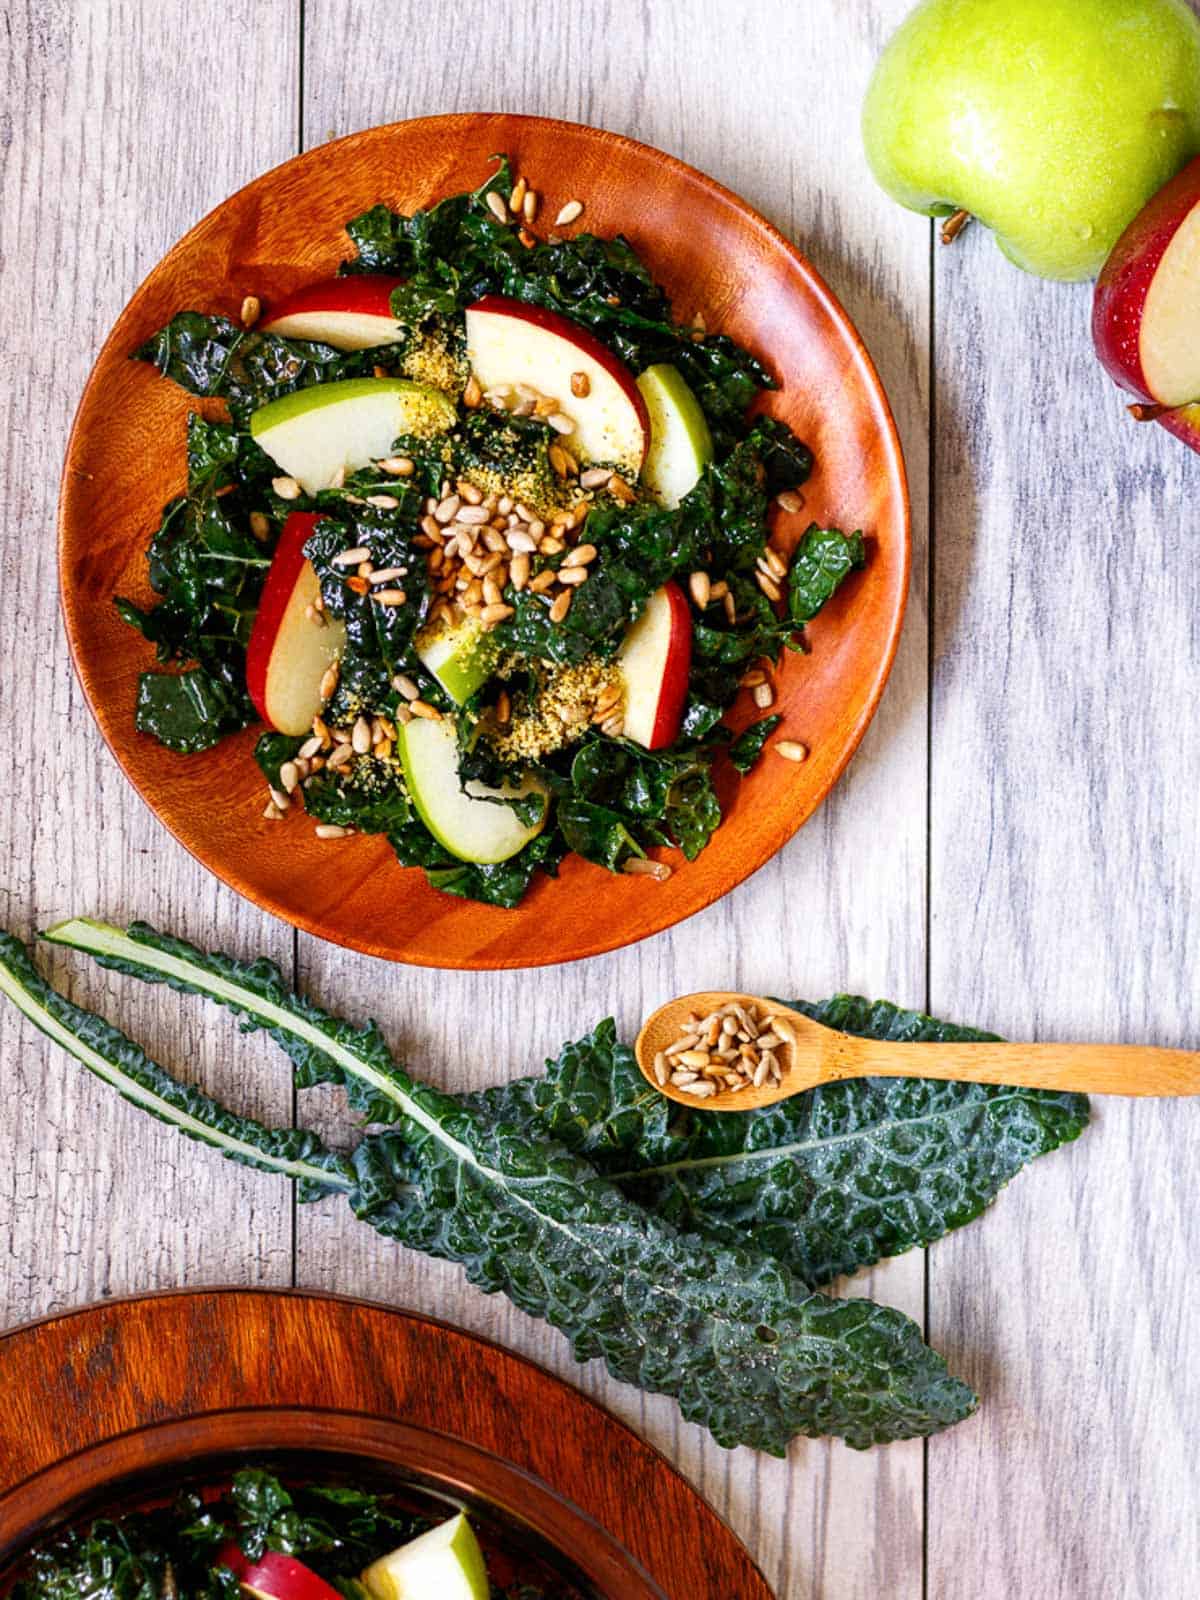 Massaged kale salad with red and green apple and toasted sunflower seeds.